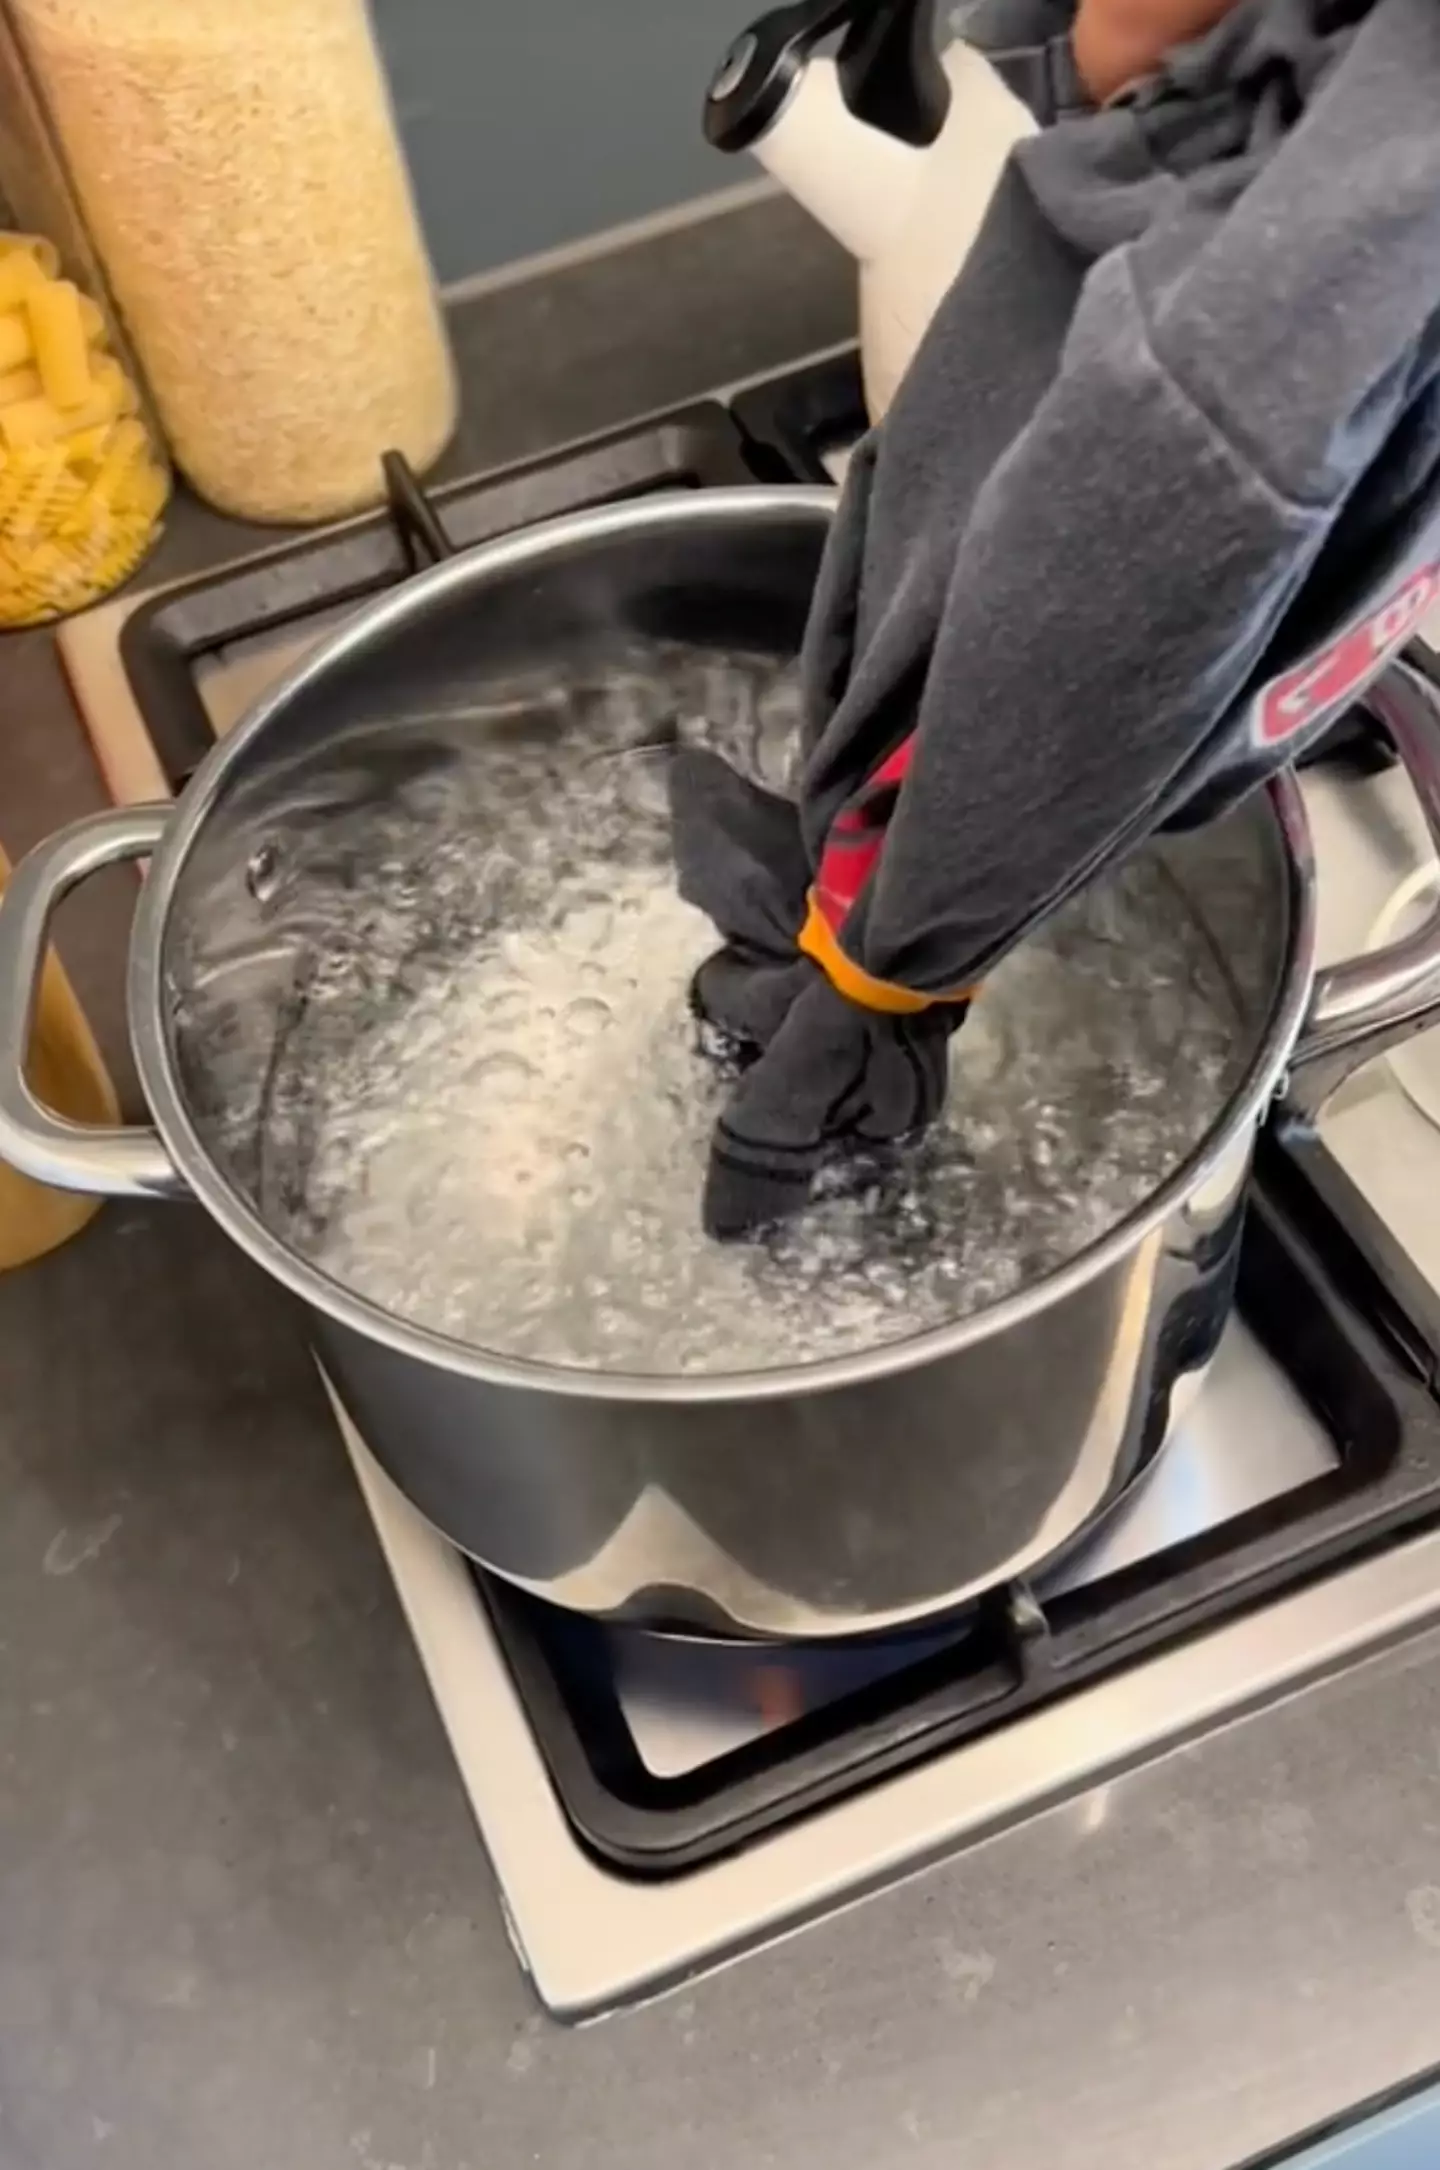 Popping the top in boiling water can help.